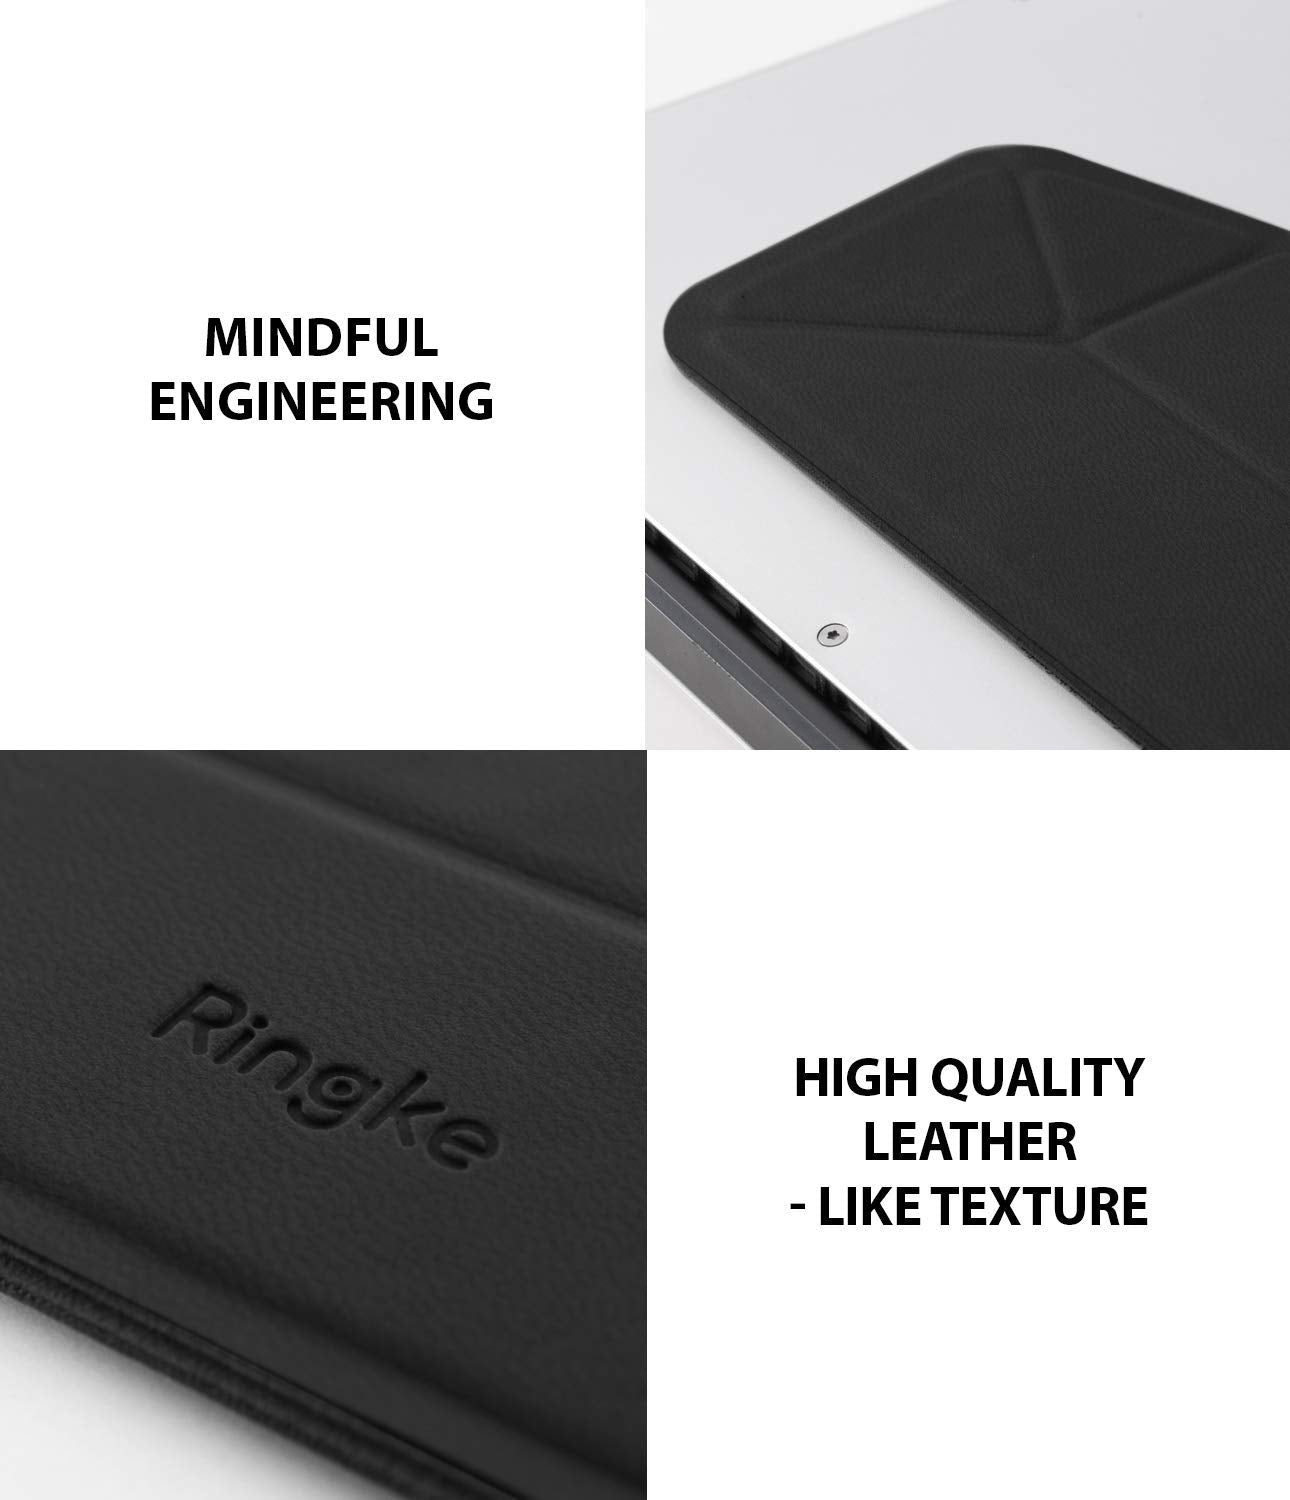 ringke laptop stand ergonomic engineering with high quality pu leather, leather-like texture